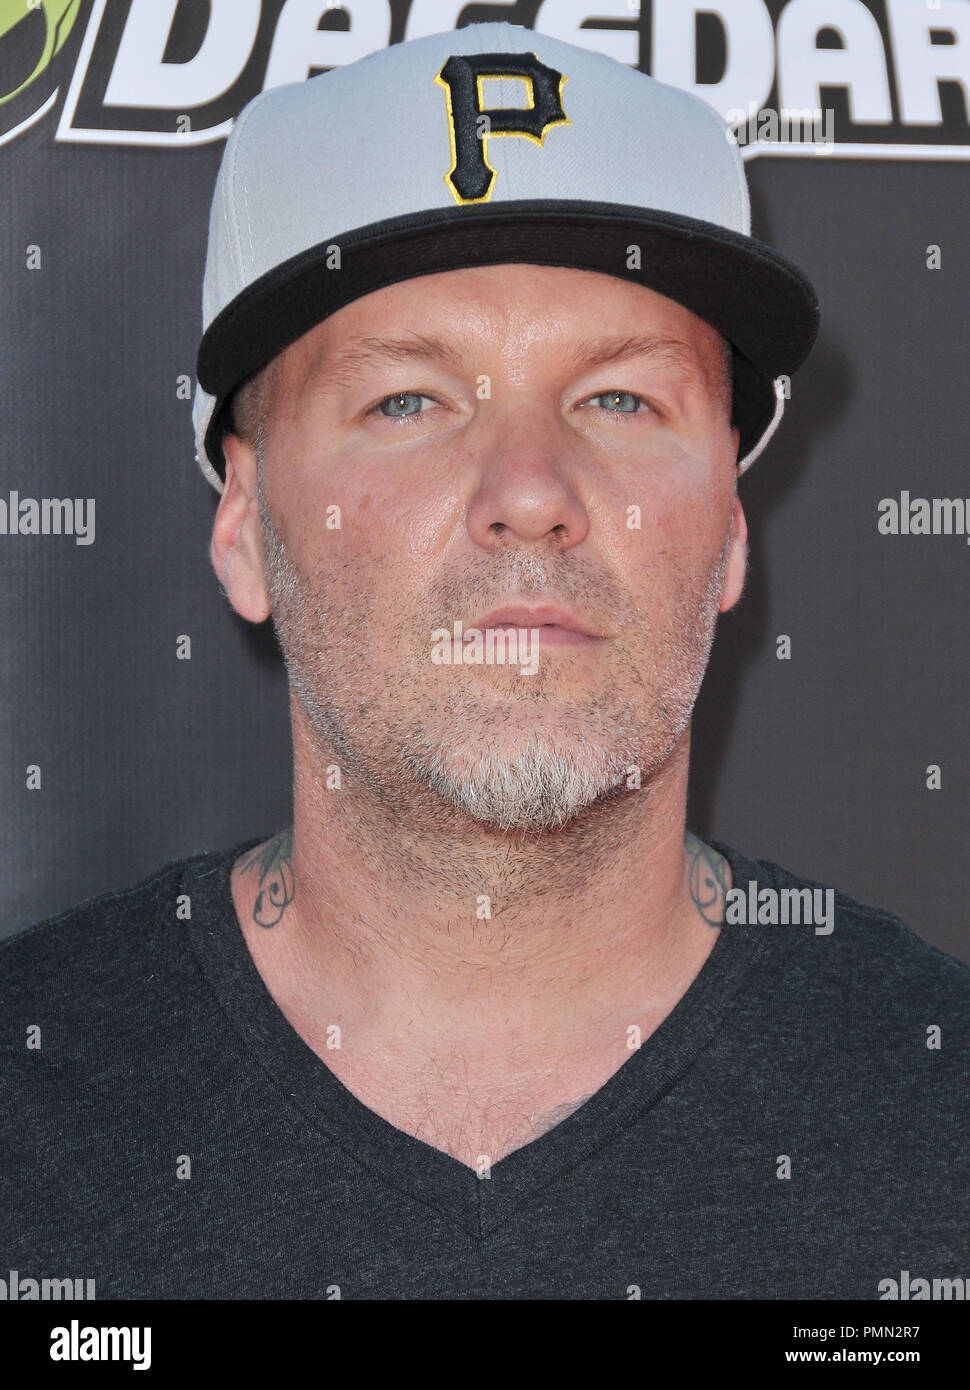 Fred Durst at Tony Hawk's 8th Annual Stand Up For Skateparks Benefit held at Ron Burkle’s Green Acres Estate in Beverly Hills, CA. The event took place on Sunday, October 2, 2011. Photo by PRPP Pacific Rim Photo Press/ PictureLux Stock Photo